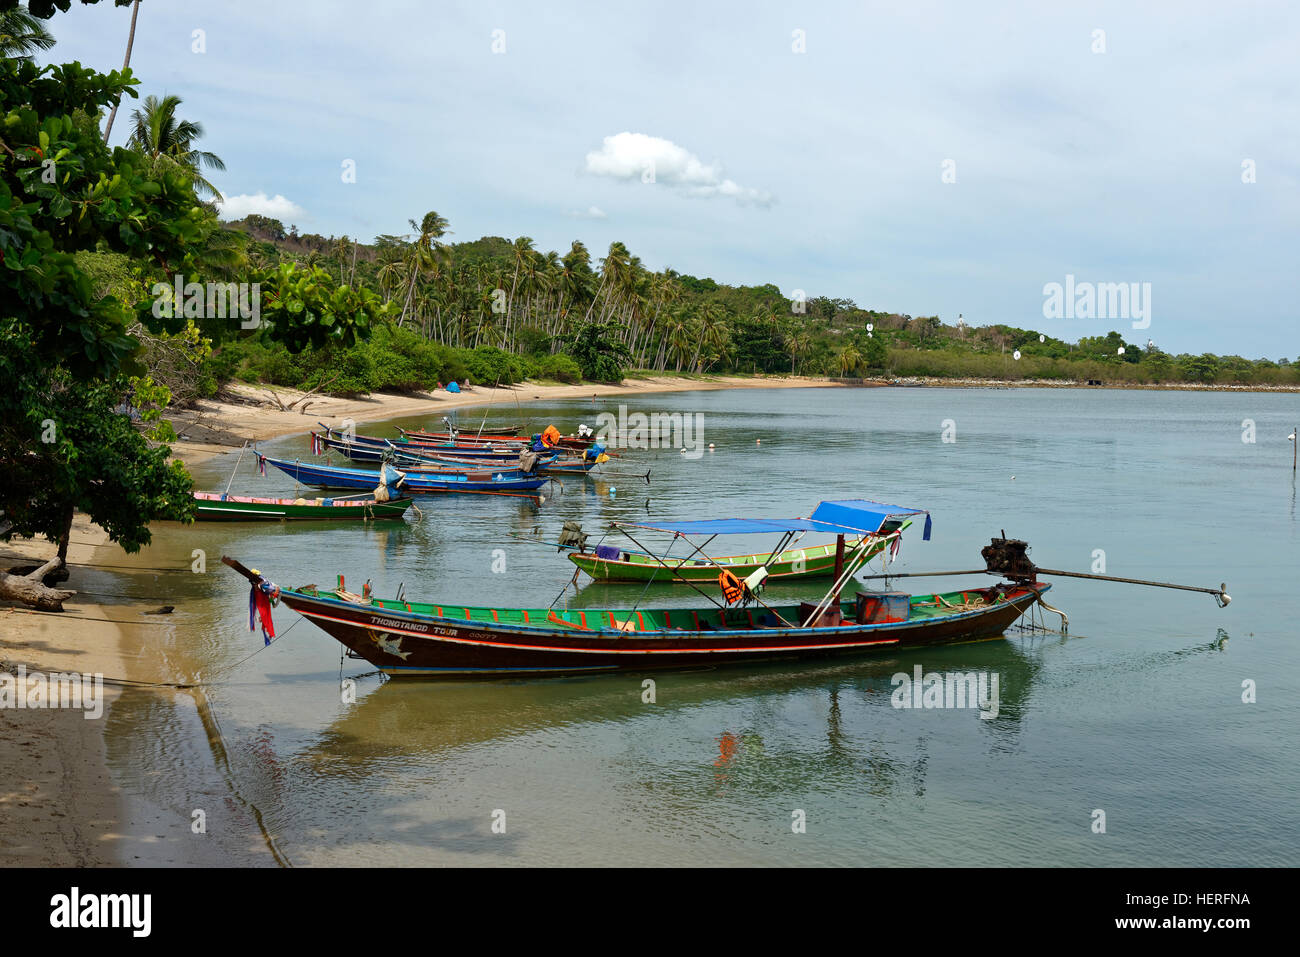 Longtail Fischerboote, Thong Tanod Pier, Taling Ngam Beach, Koh Samui, Thailand Stockfoto